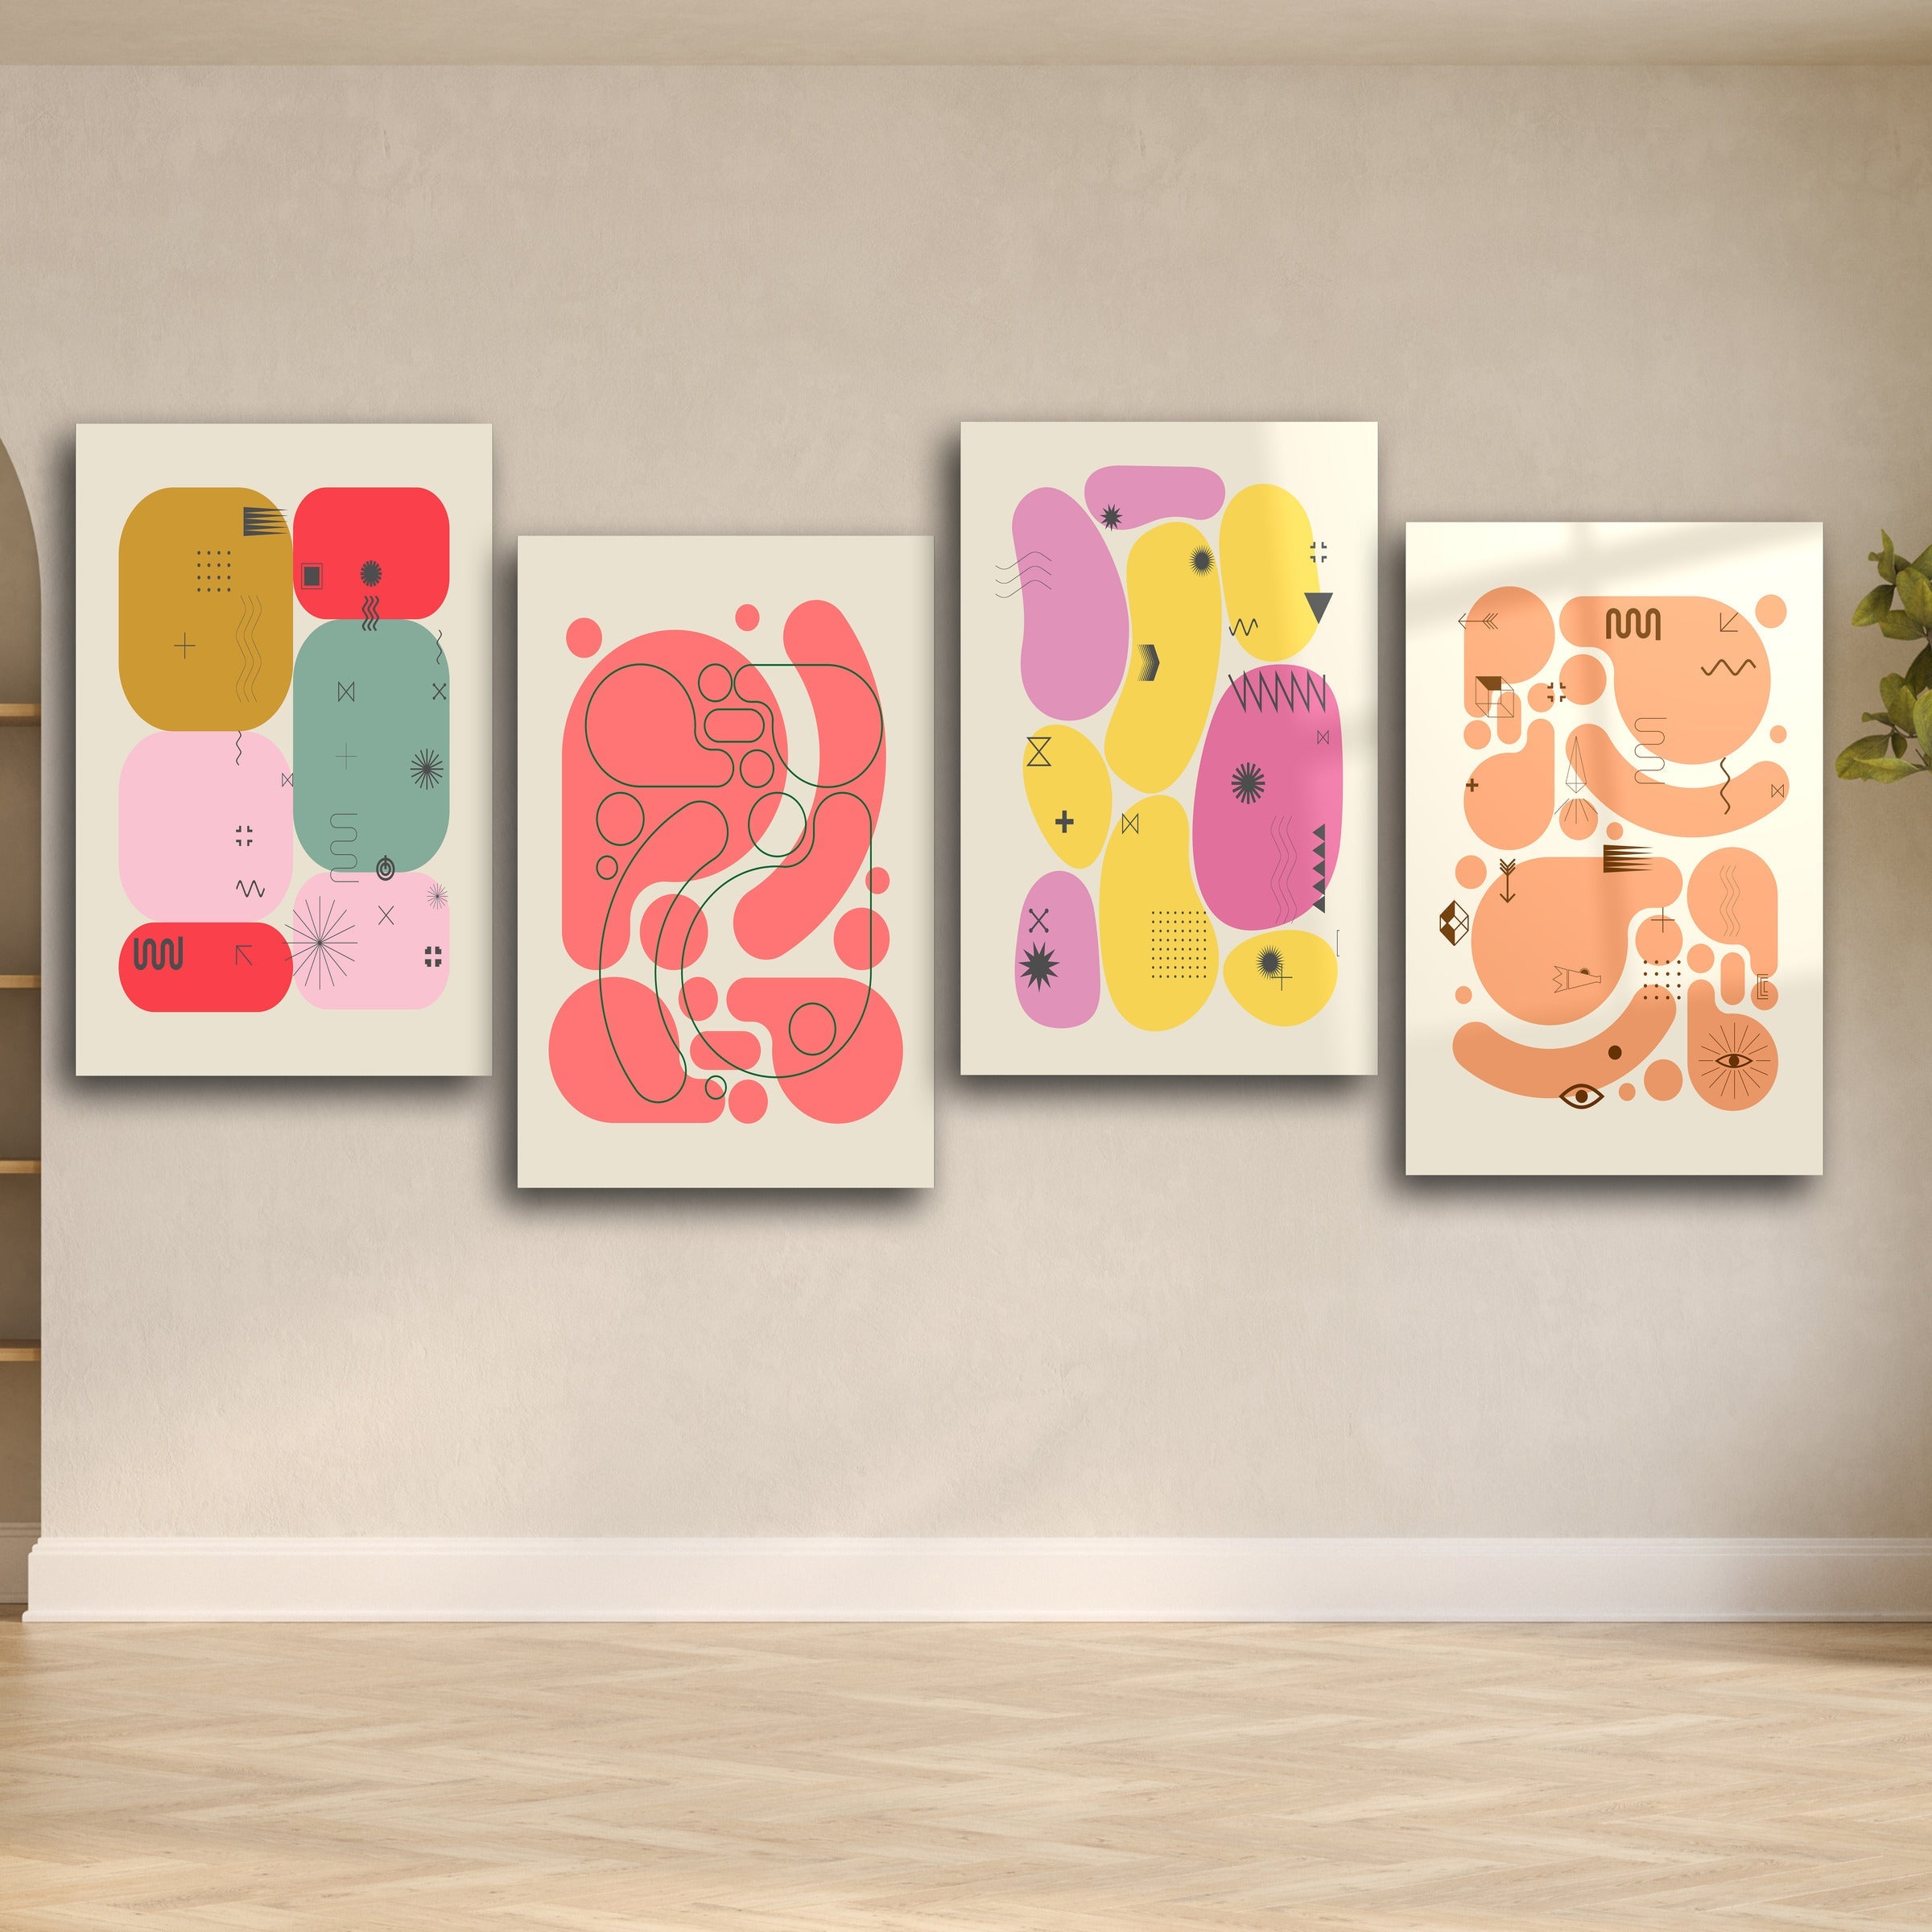 ."Abstract Quadro". Contemporary Gallery Collection Glass Wall Art